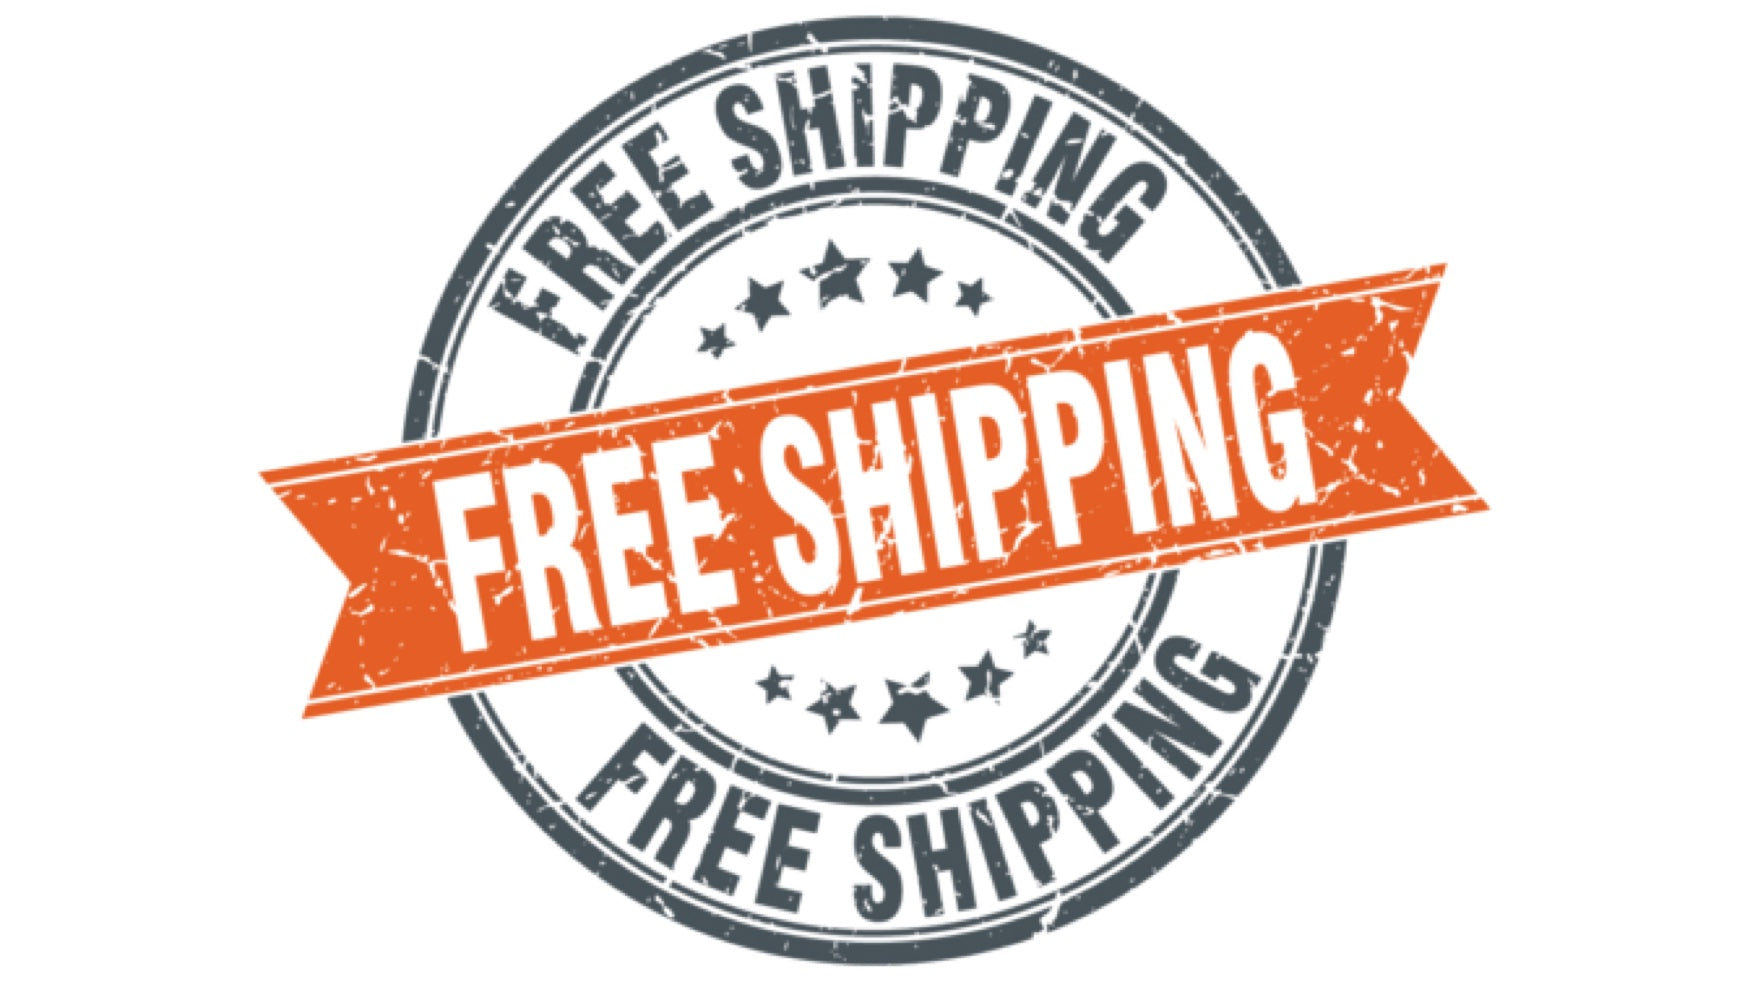 Announcing FREE SHIPPING on Everything - ALL THE TIME!